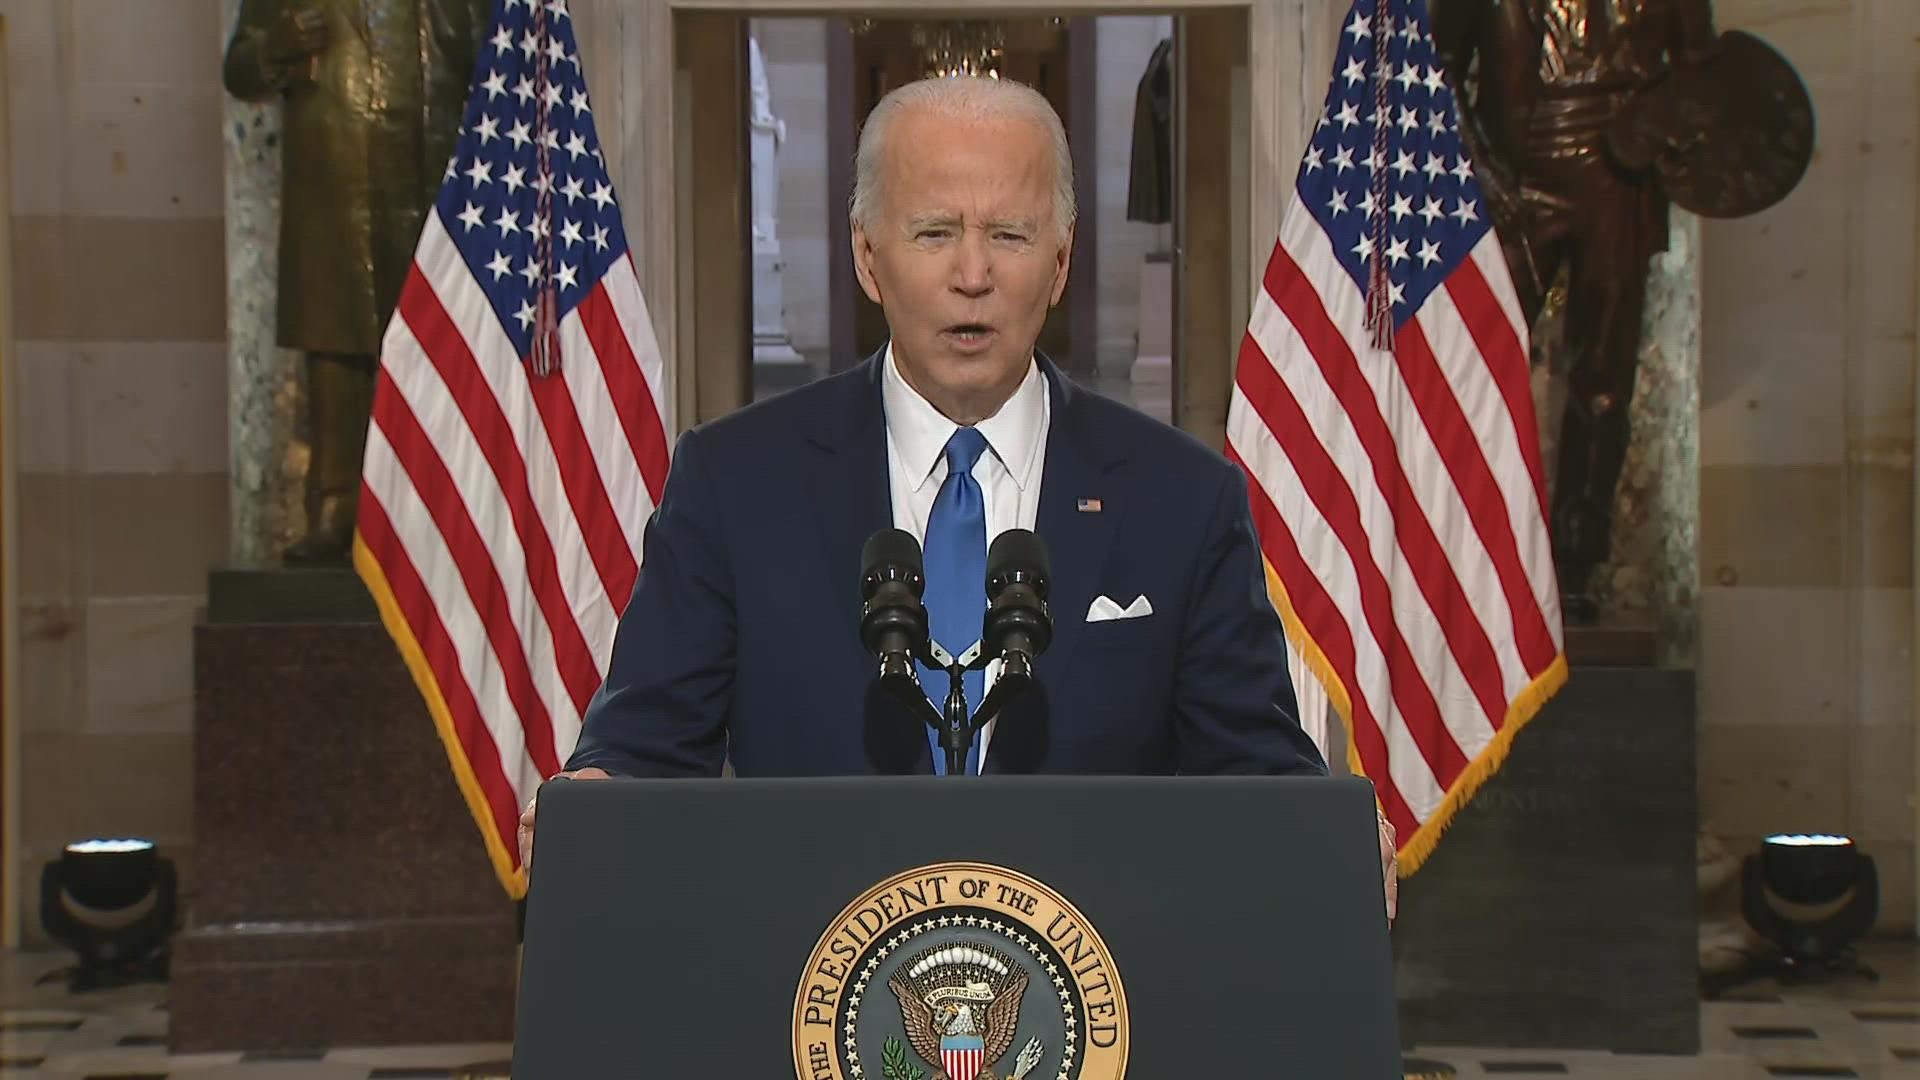 Biden said Trump spread a "web of lies" because he cared more about power than the will of the people.